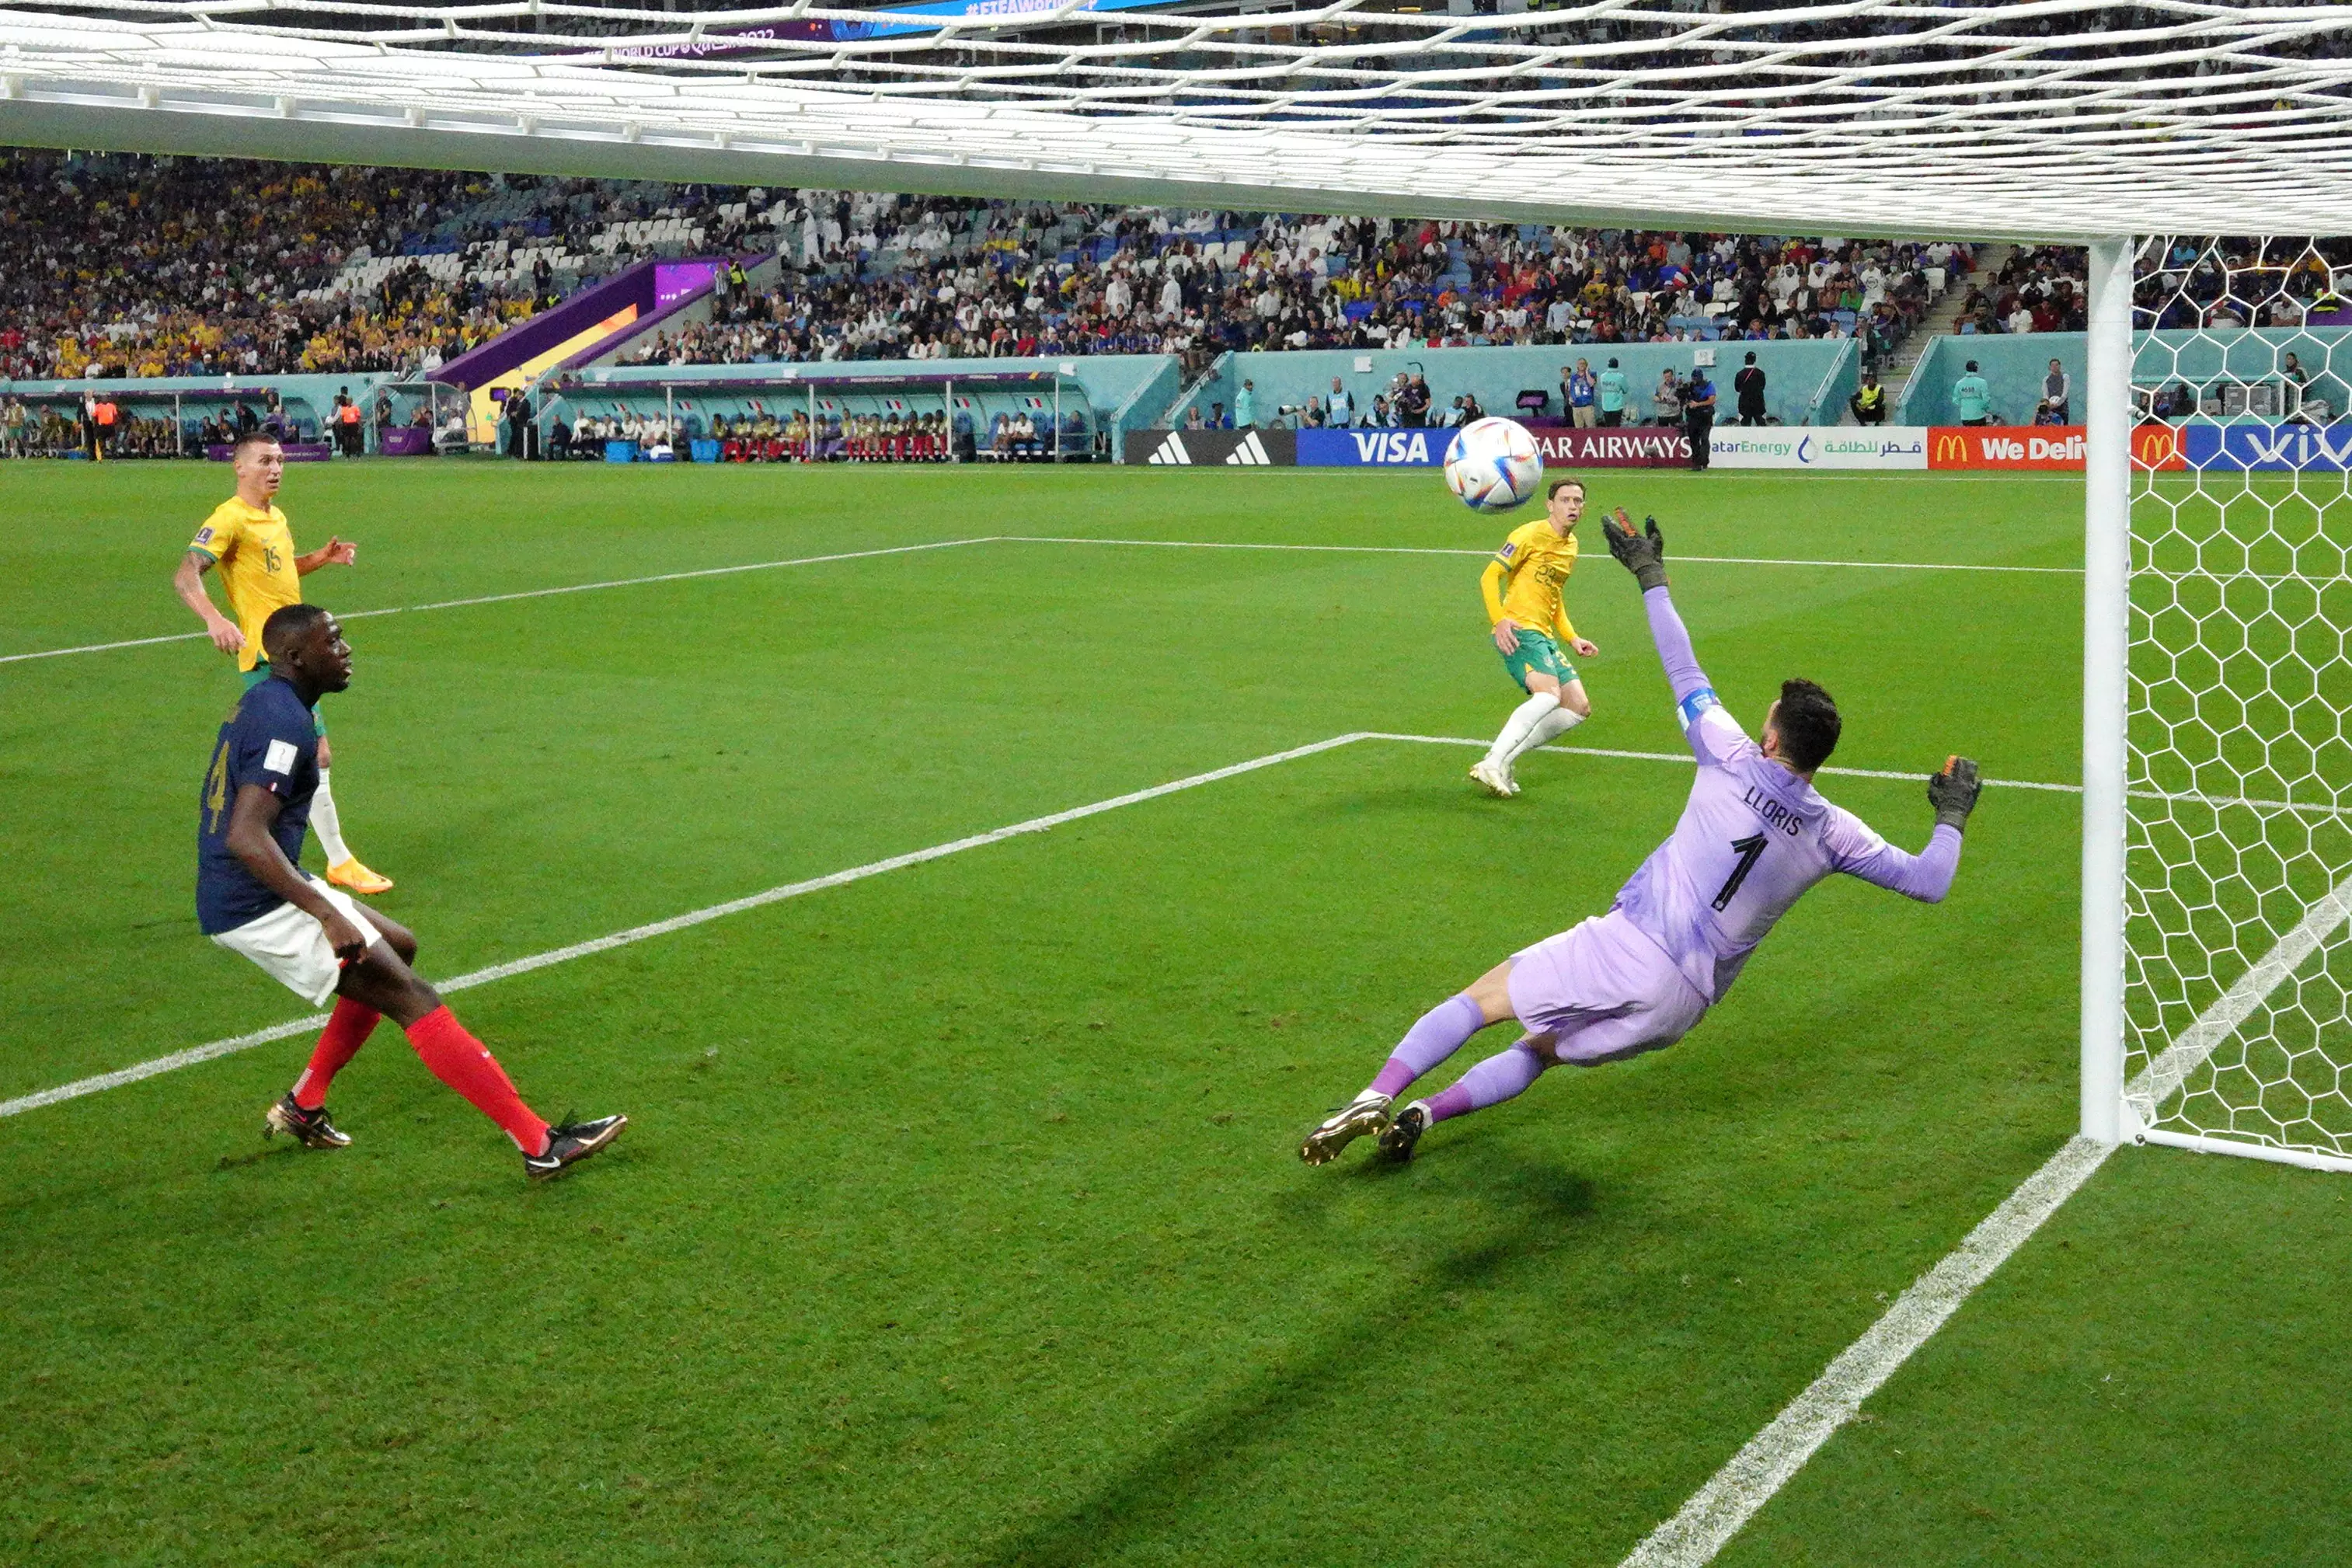 Craig Goodwin opens the scoring against France in the 2022 FIFA World Cup